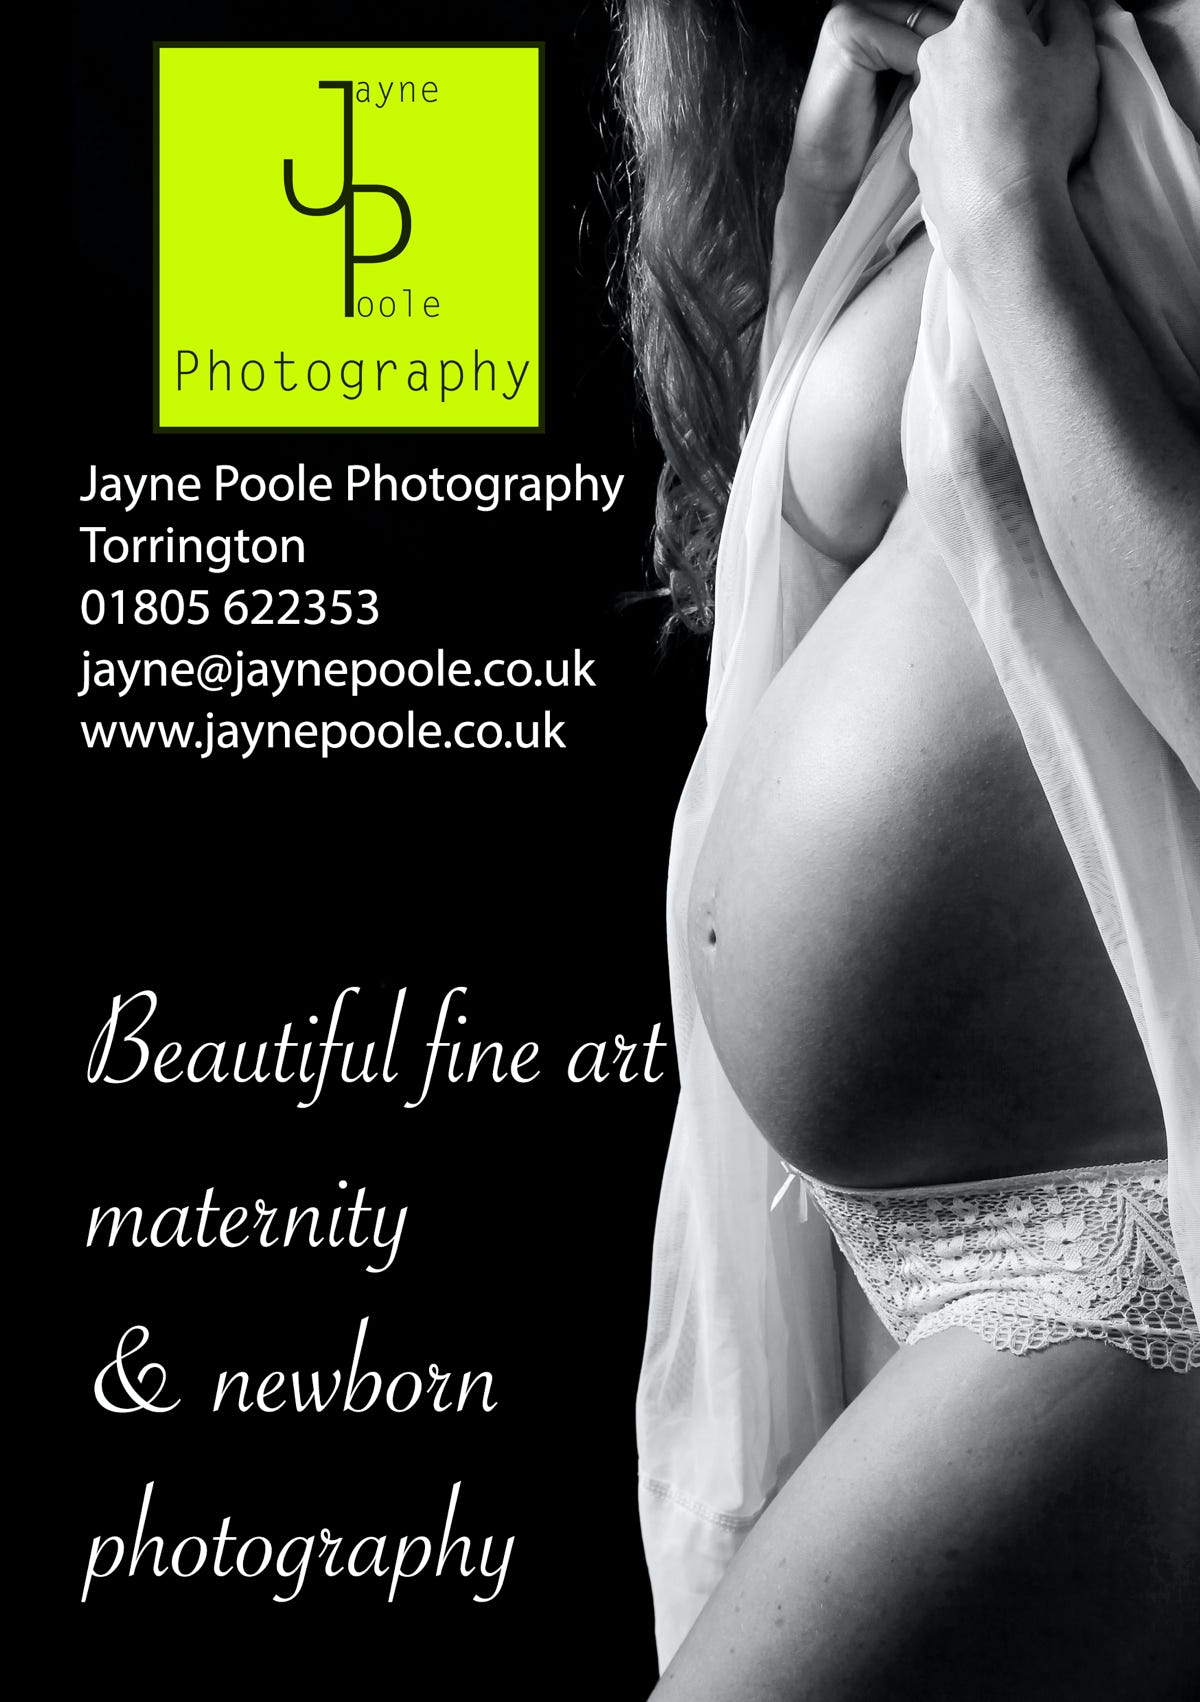 Newborn photography flyer by Jayne Poole based in North Devon near Barnstaple, Bideford, Braunton, Ilfracombe, Northam, Bude, Holsworthy, Okehampton, Crediton and Exeter, located in the town of Great Torrington